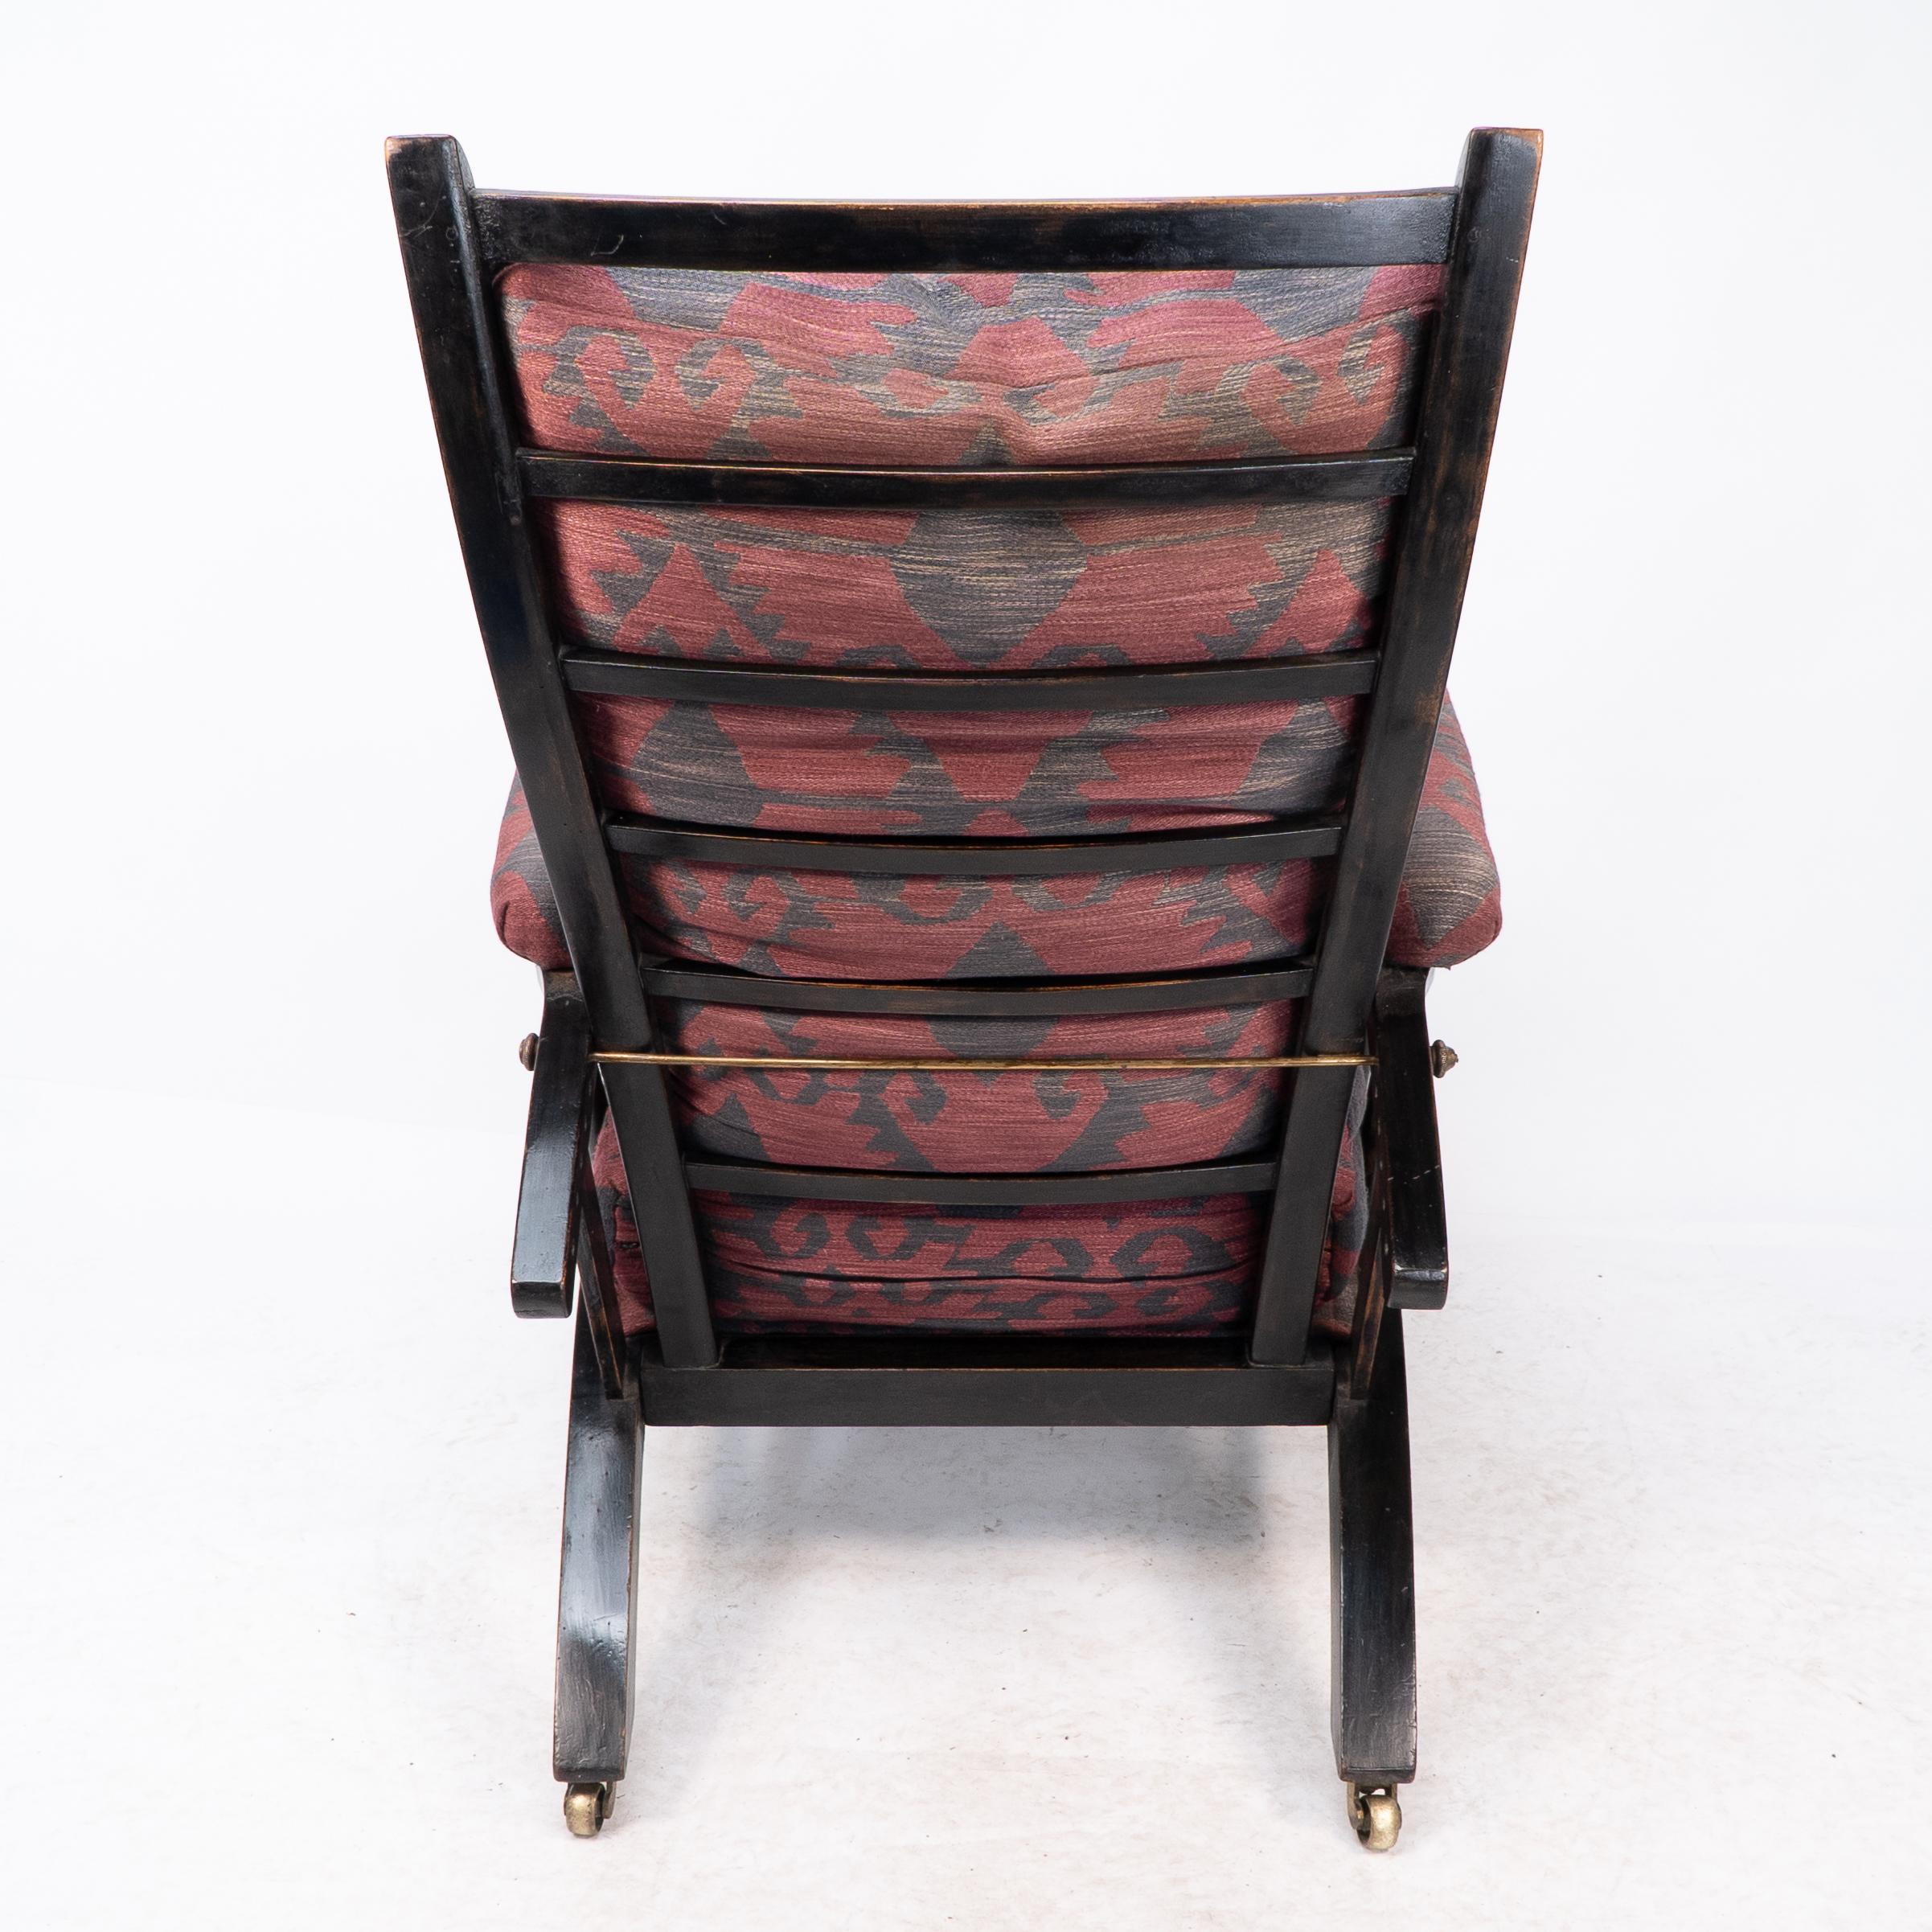 Phillip Webb for Morris & Co. an English Aesthetic Movement Reclining Armchair For Sale 10